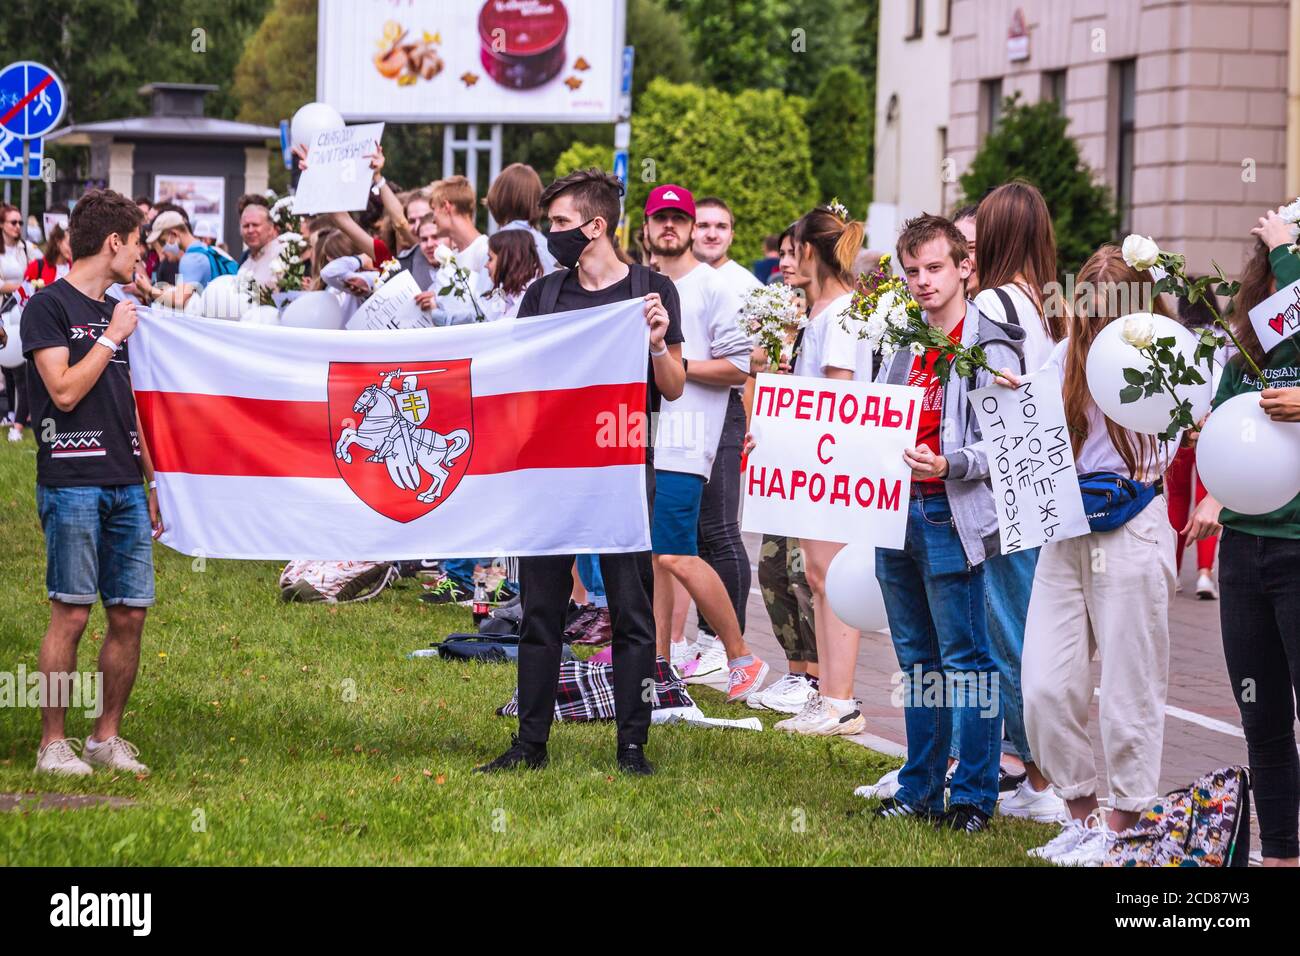 Students show flag during peaceful protests against stolen presidential elections in Minsk, Belarus. Minsk, Belarus - August 15 2020. Stock Photo